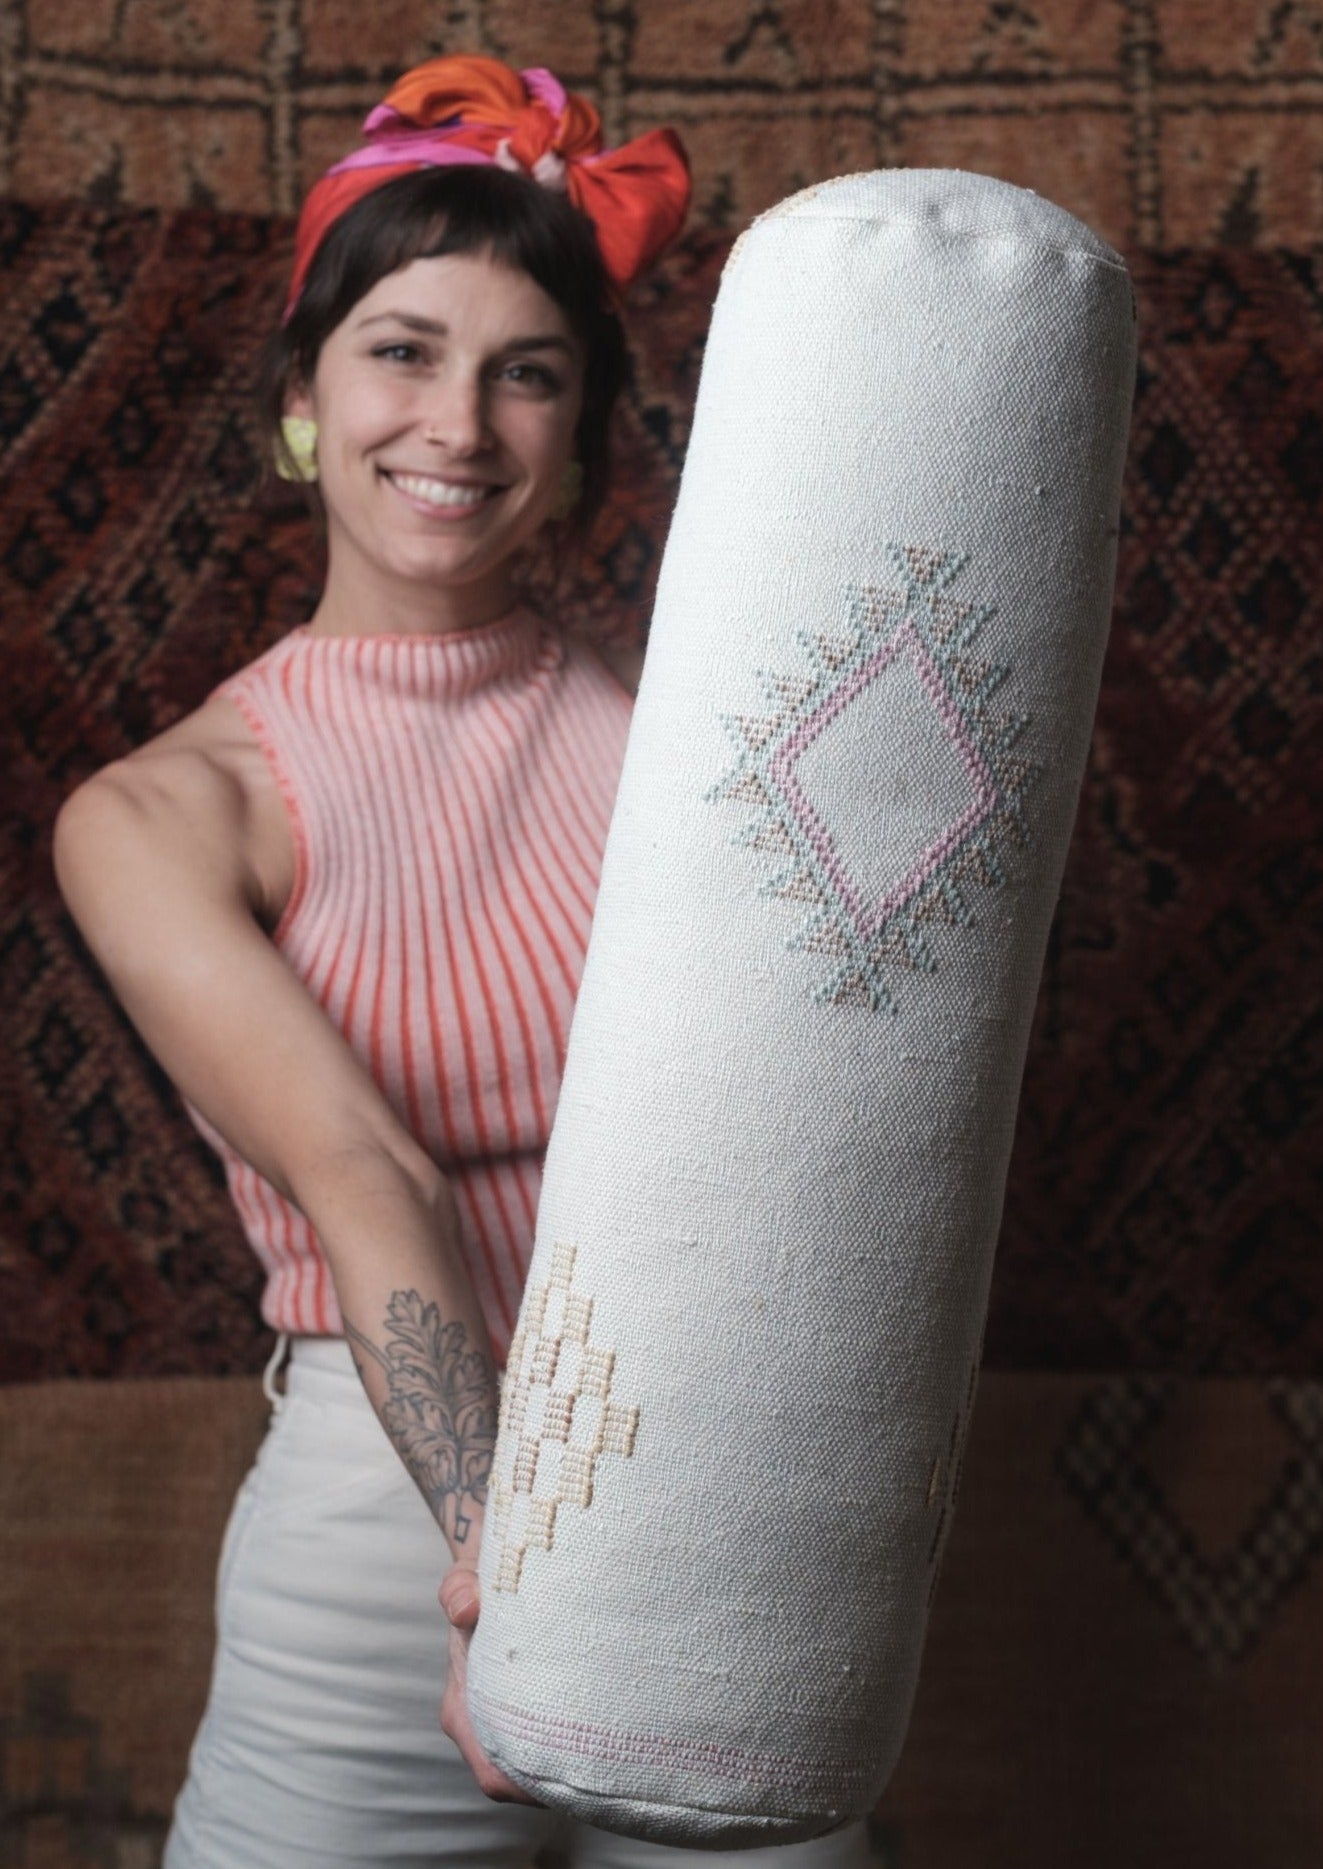 white lumbar pillow made from vegan friendly material with berber symbols hand stitched by artisans of morocco. pretty girl wearing soluna pink top made from organic fibers with pink bow and loud ones green checkered earrings with a rug back drop. 